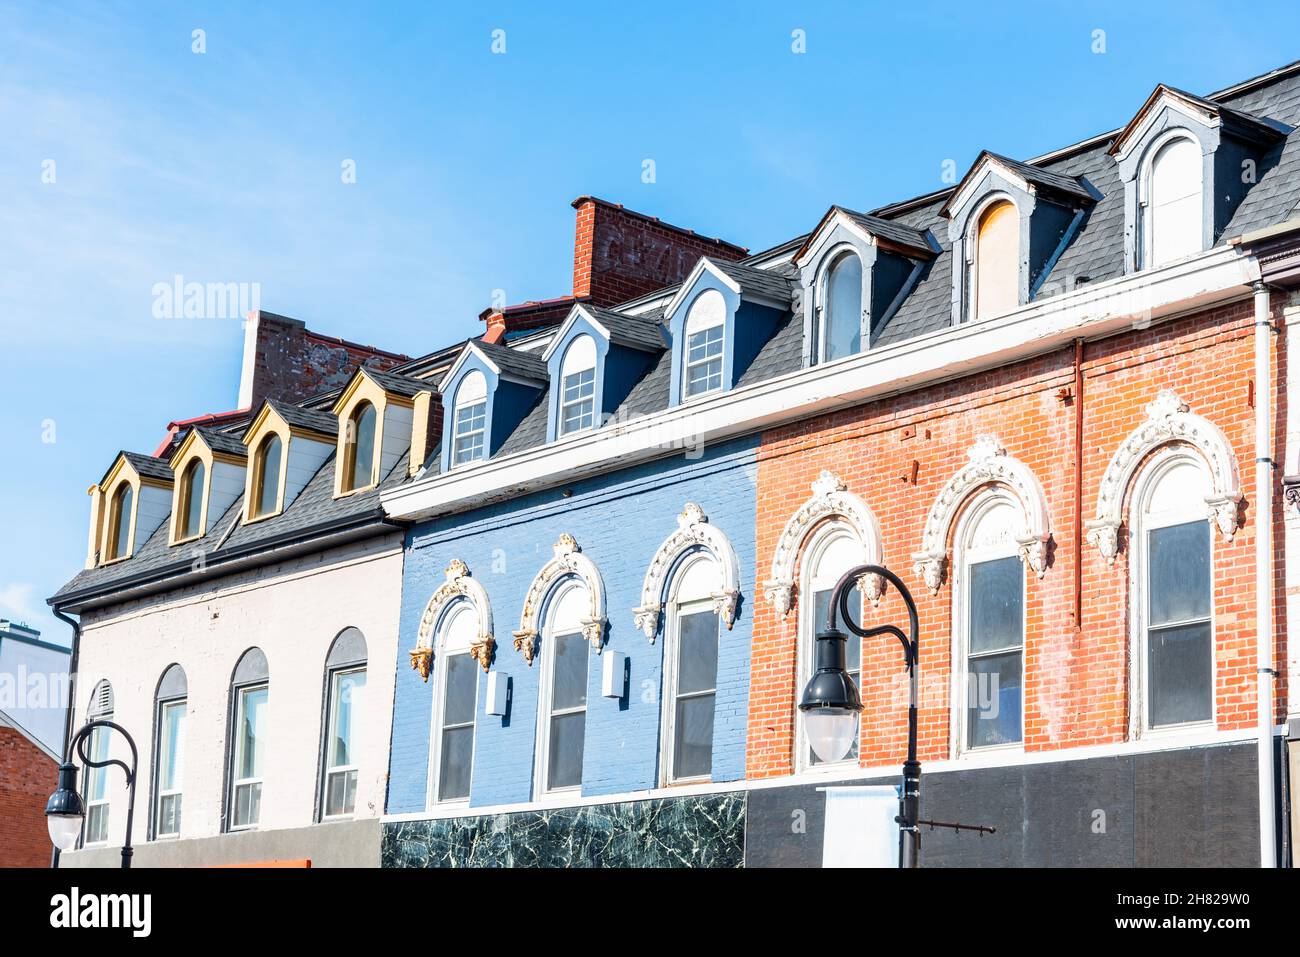 Row of historic buildings with shops on ground level in a city centre on a sunny autumn day Stock Photo